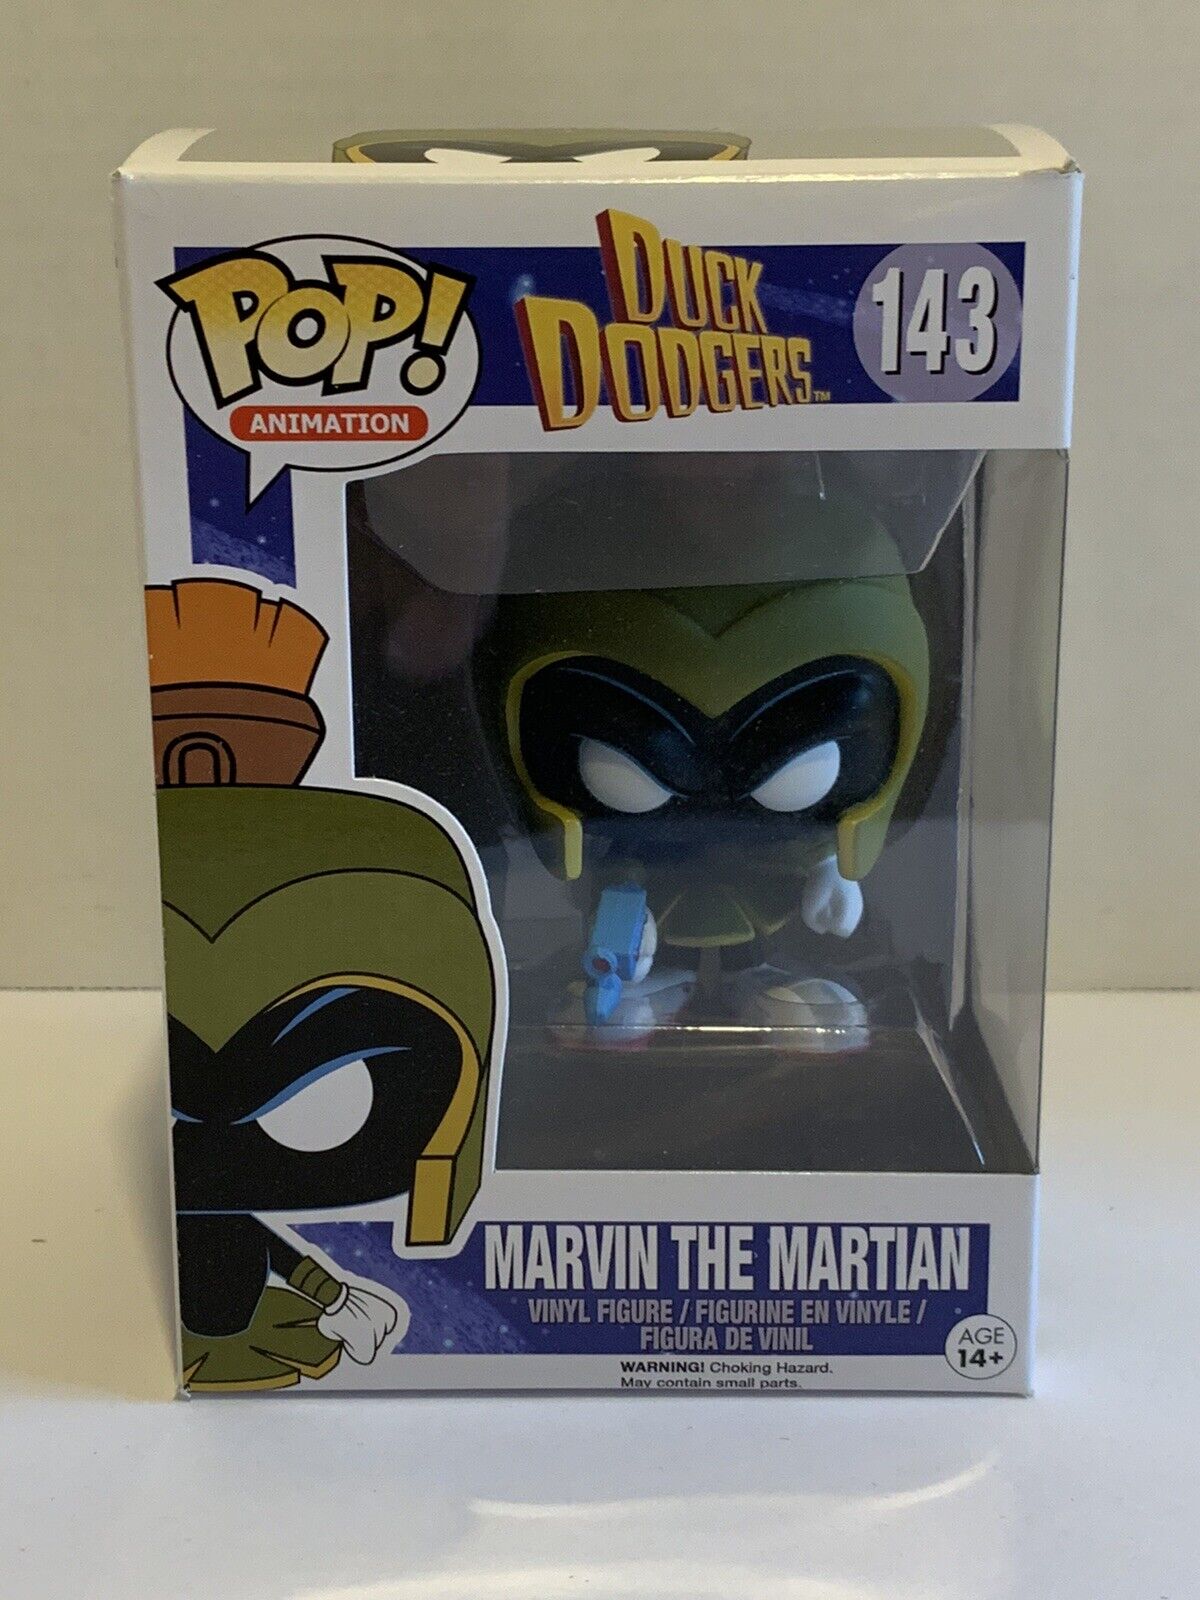 FUNKO POP ANIMATION DUCK DODGERS #143 MARVIN THE MARTIAN NEW VAULTED